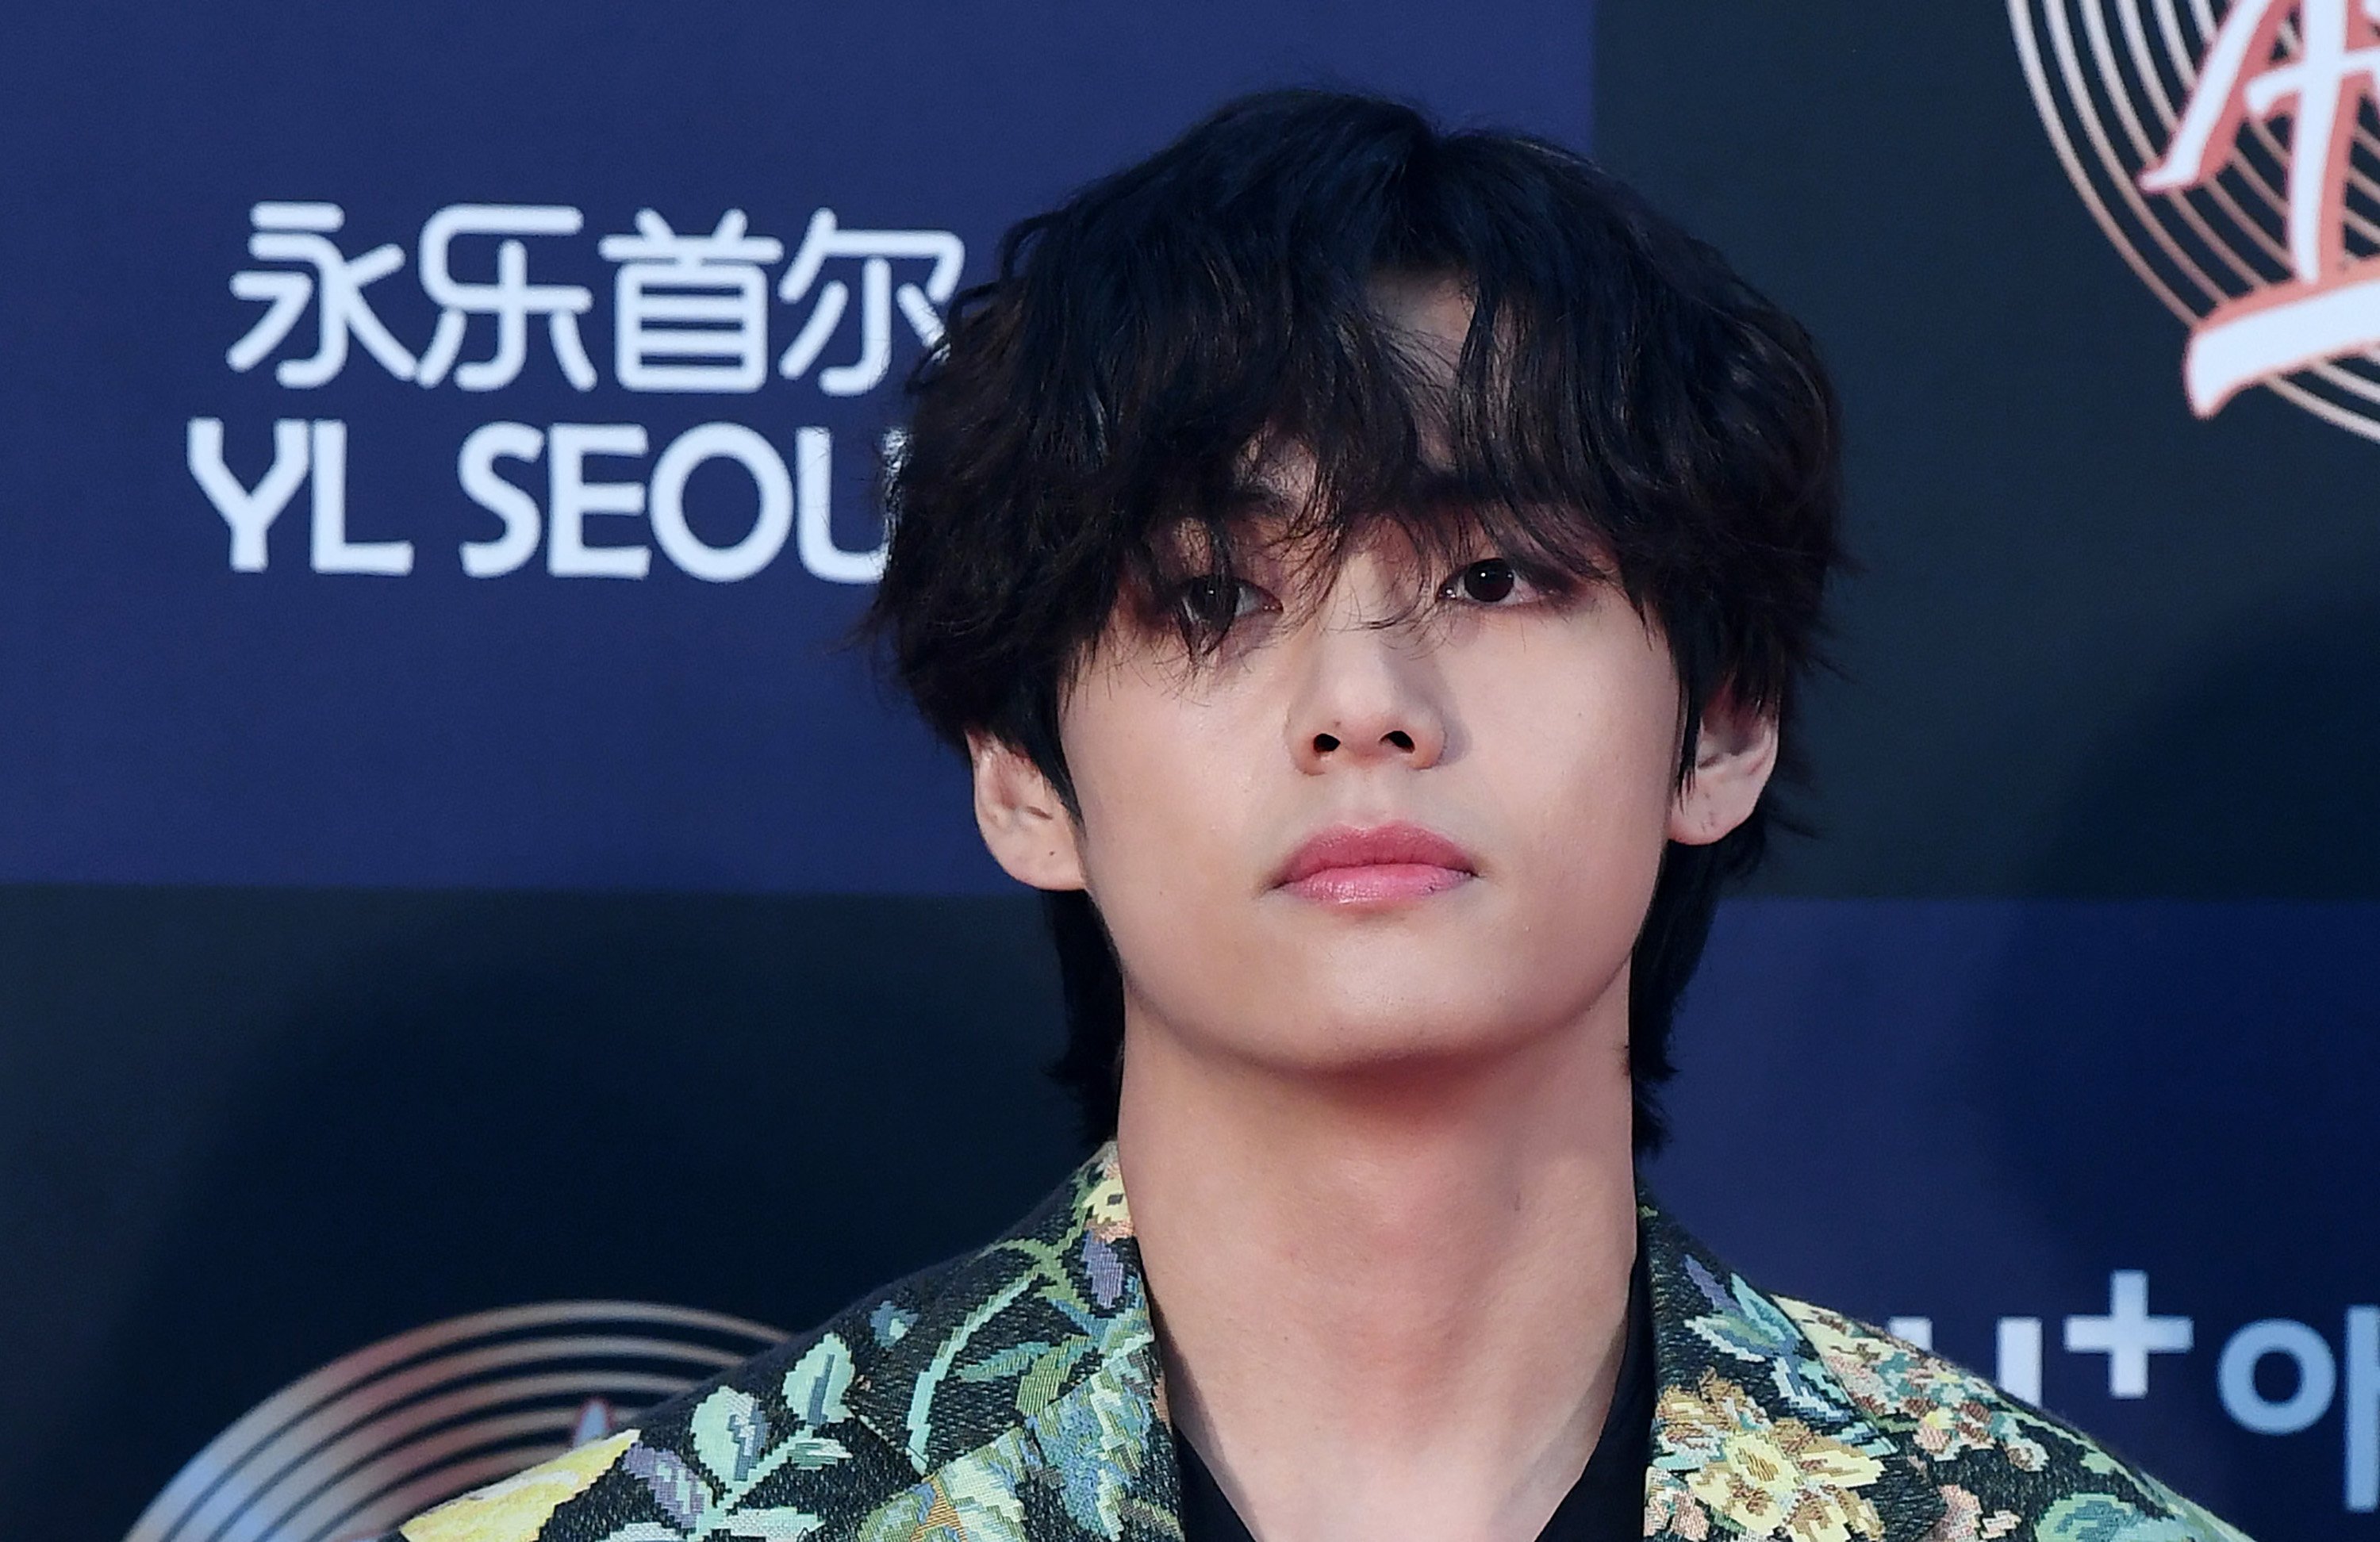 This BTS Member Was Told He Has a 'Soulful' Voice by a Famous Choir Director